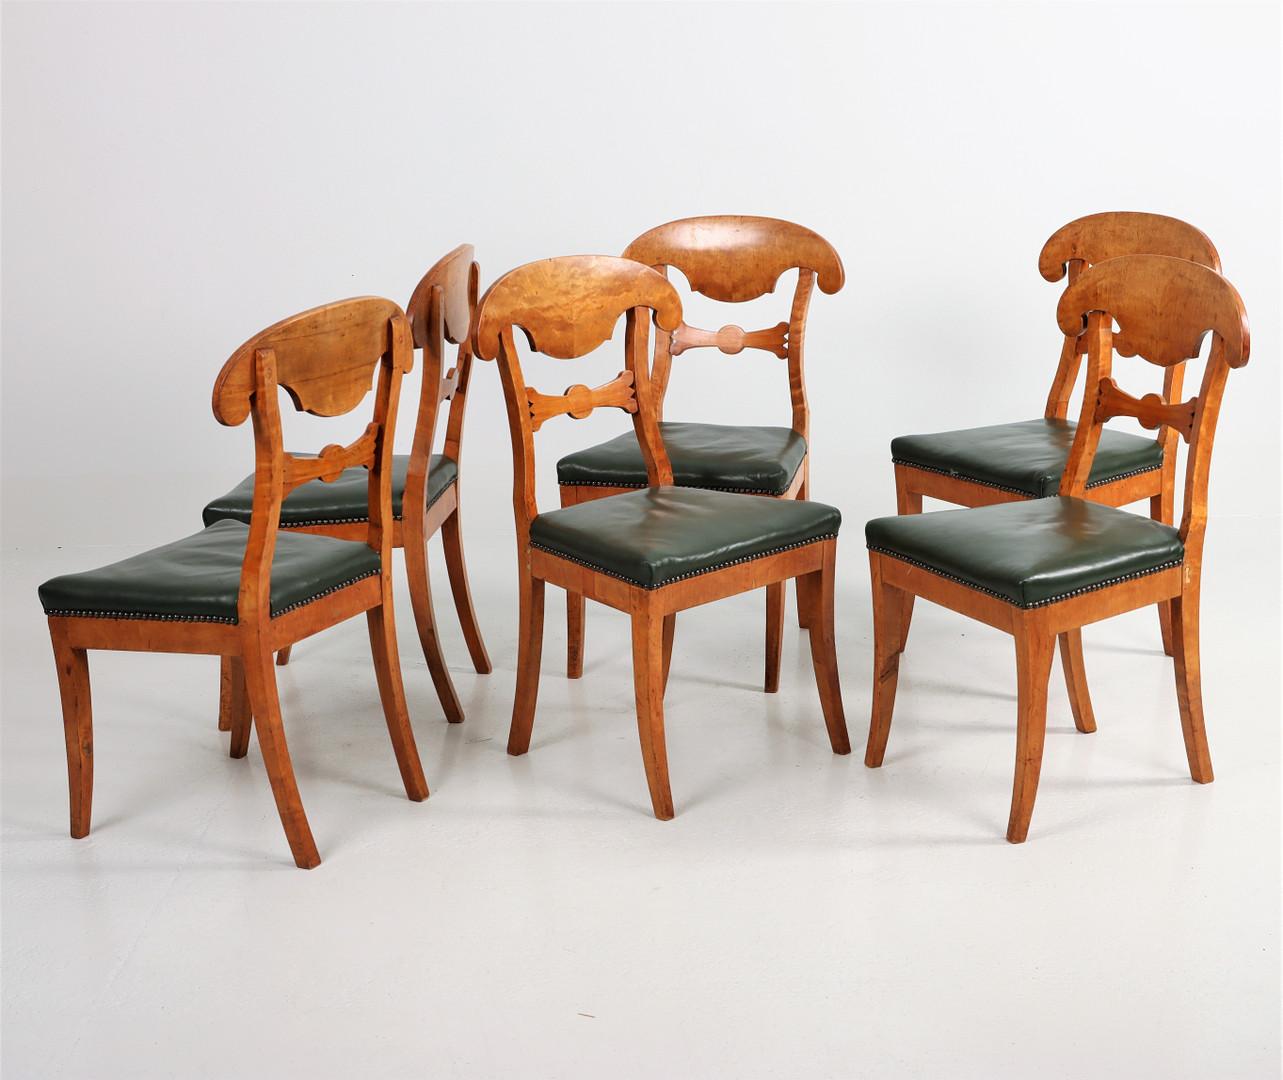 Delicious and rare set of 6 antique Swedish flame golden birch Biedermeier dining chairs from C1820-1850 with the distinctive curved seat back, carved central motif and gracefully curved front legs.

The top grade flame veneers are brought to life